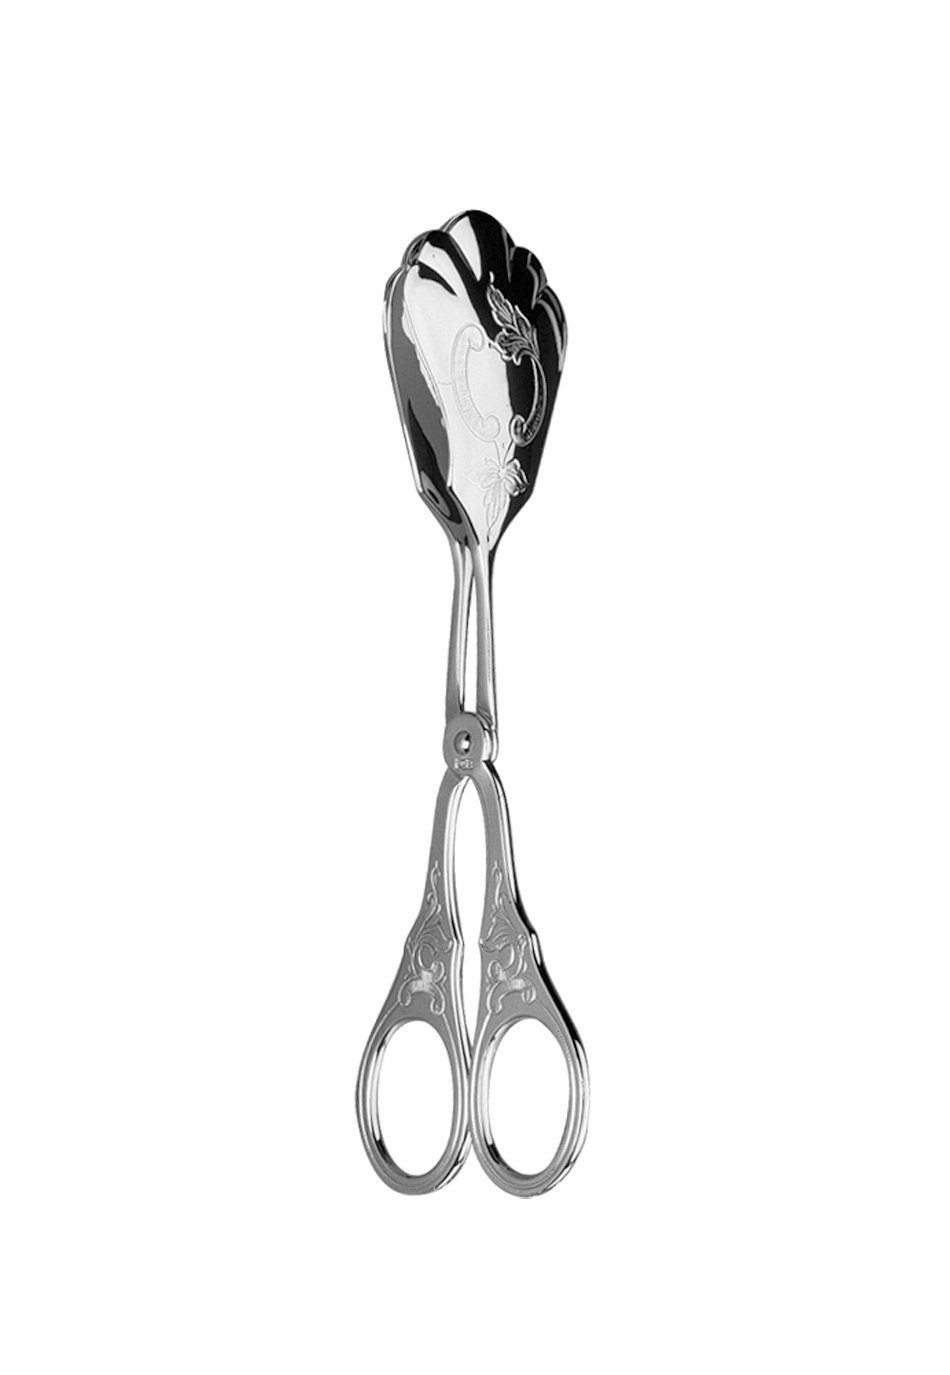 Ostfriesen Pastry Tongs (150g massive silverplated)